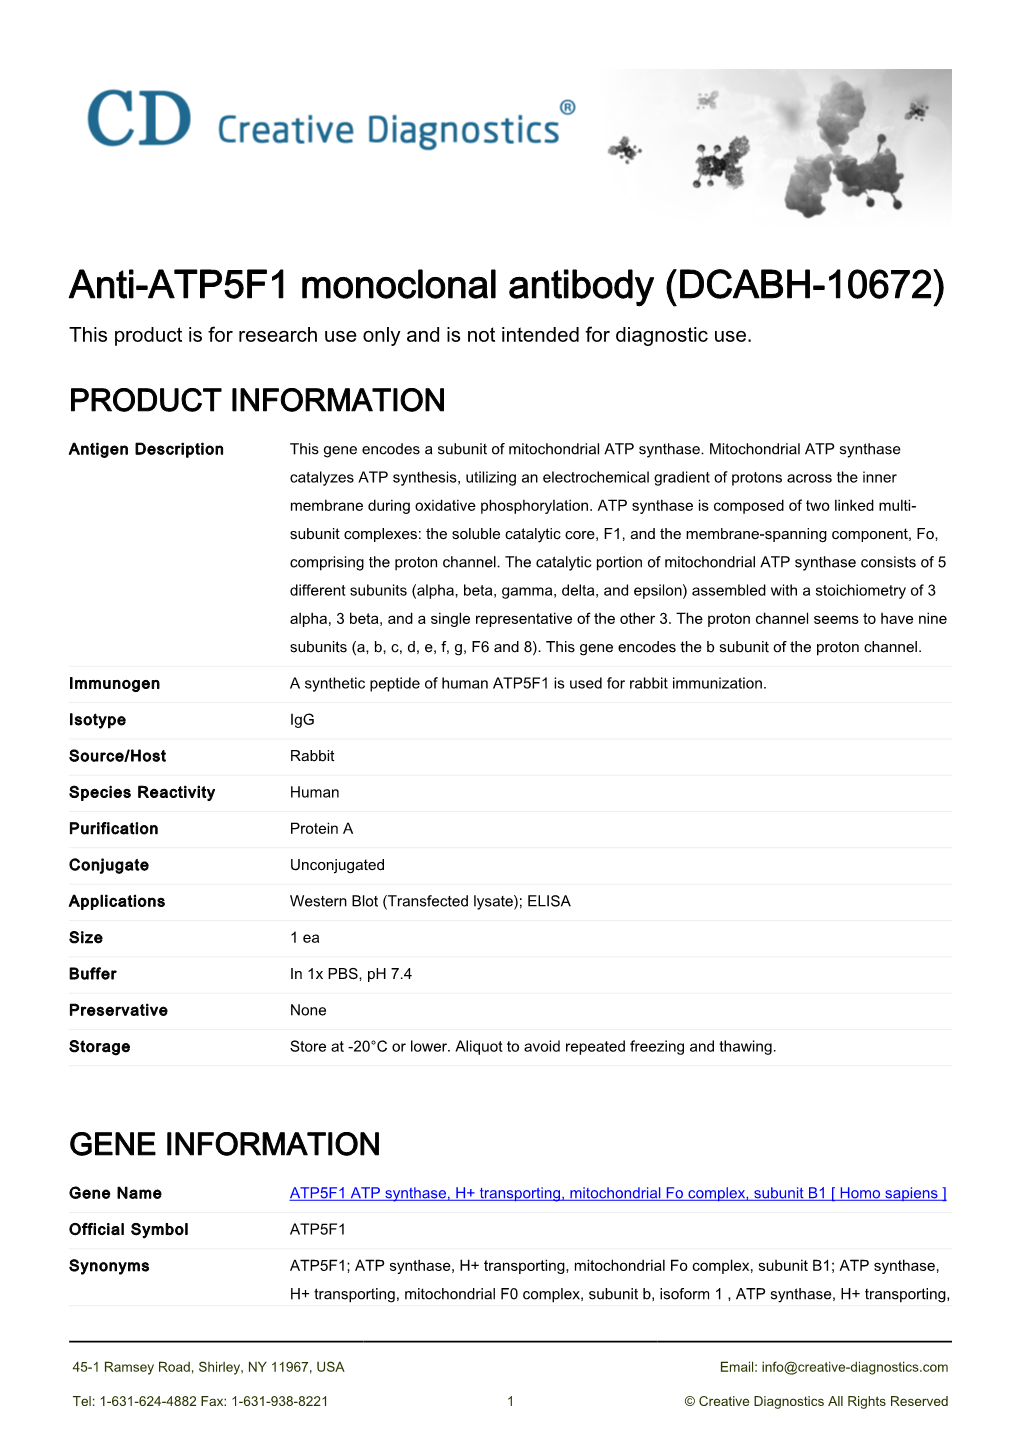 Anti-ATP5F1 Monoclonal Antibody (DCABH-10672) This Product Is for Research Use Only and Is Not Intended for Diagnostic Use